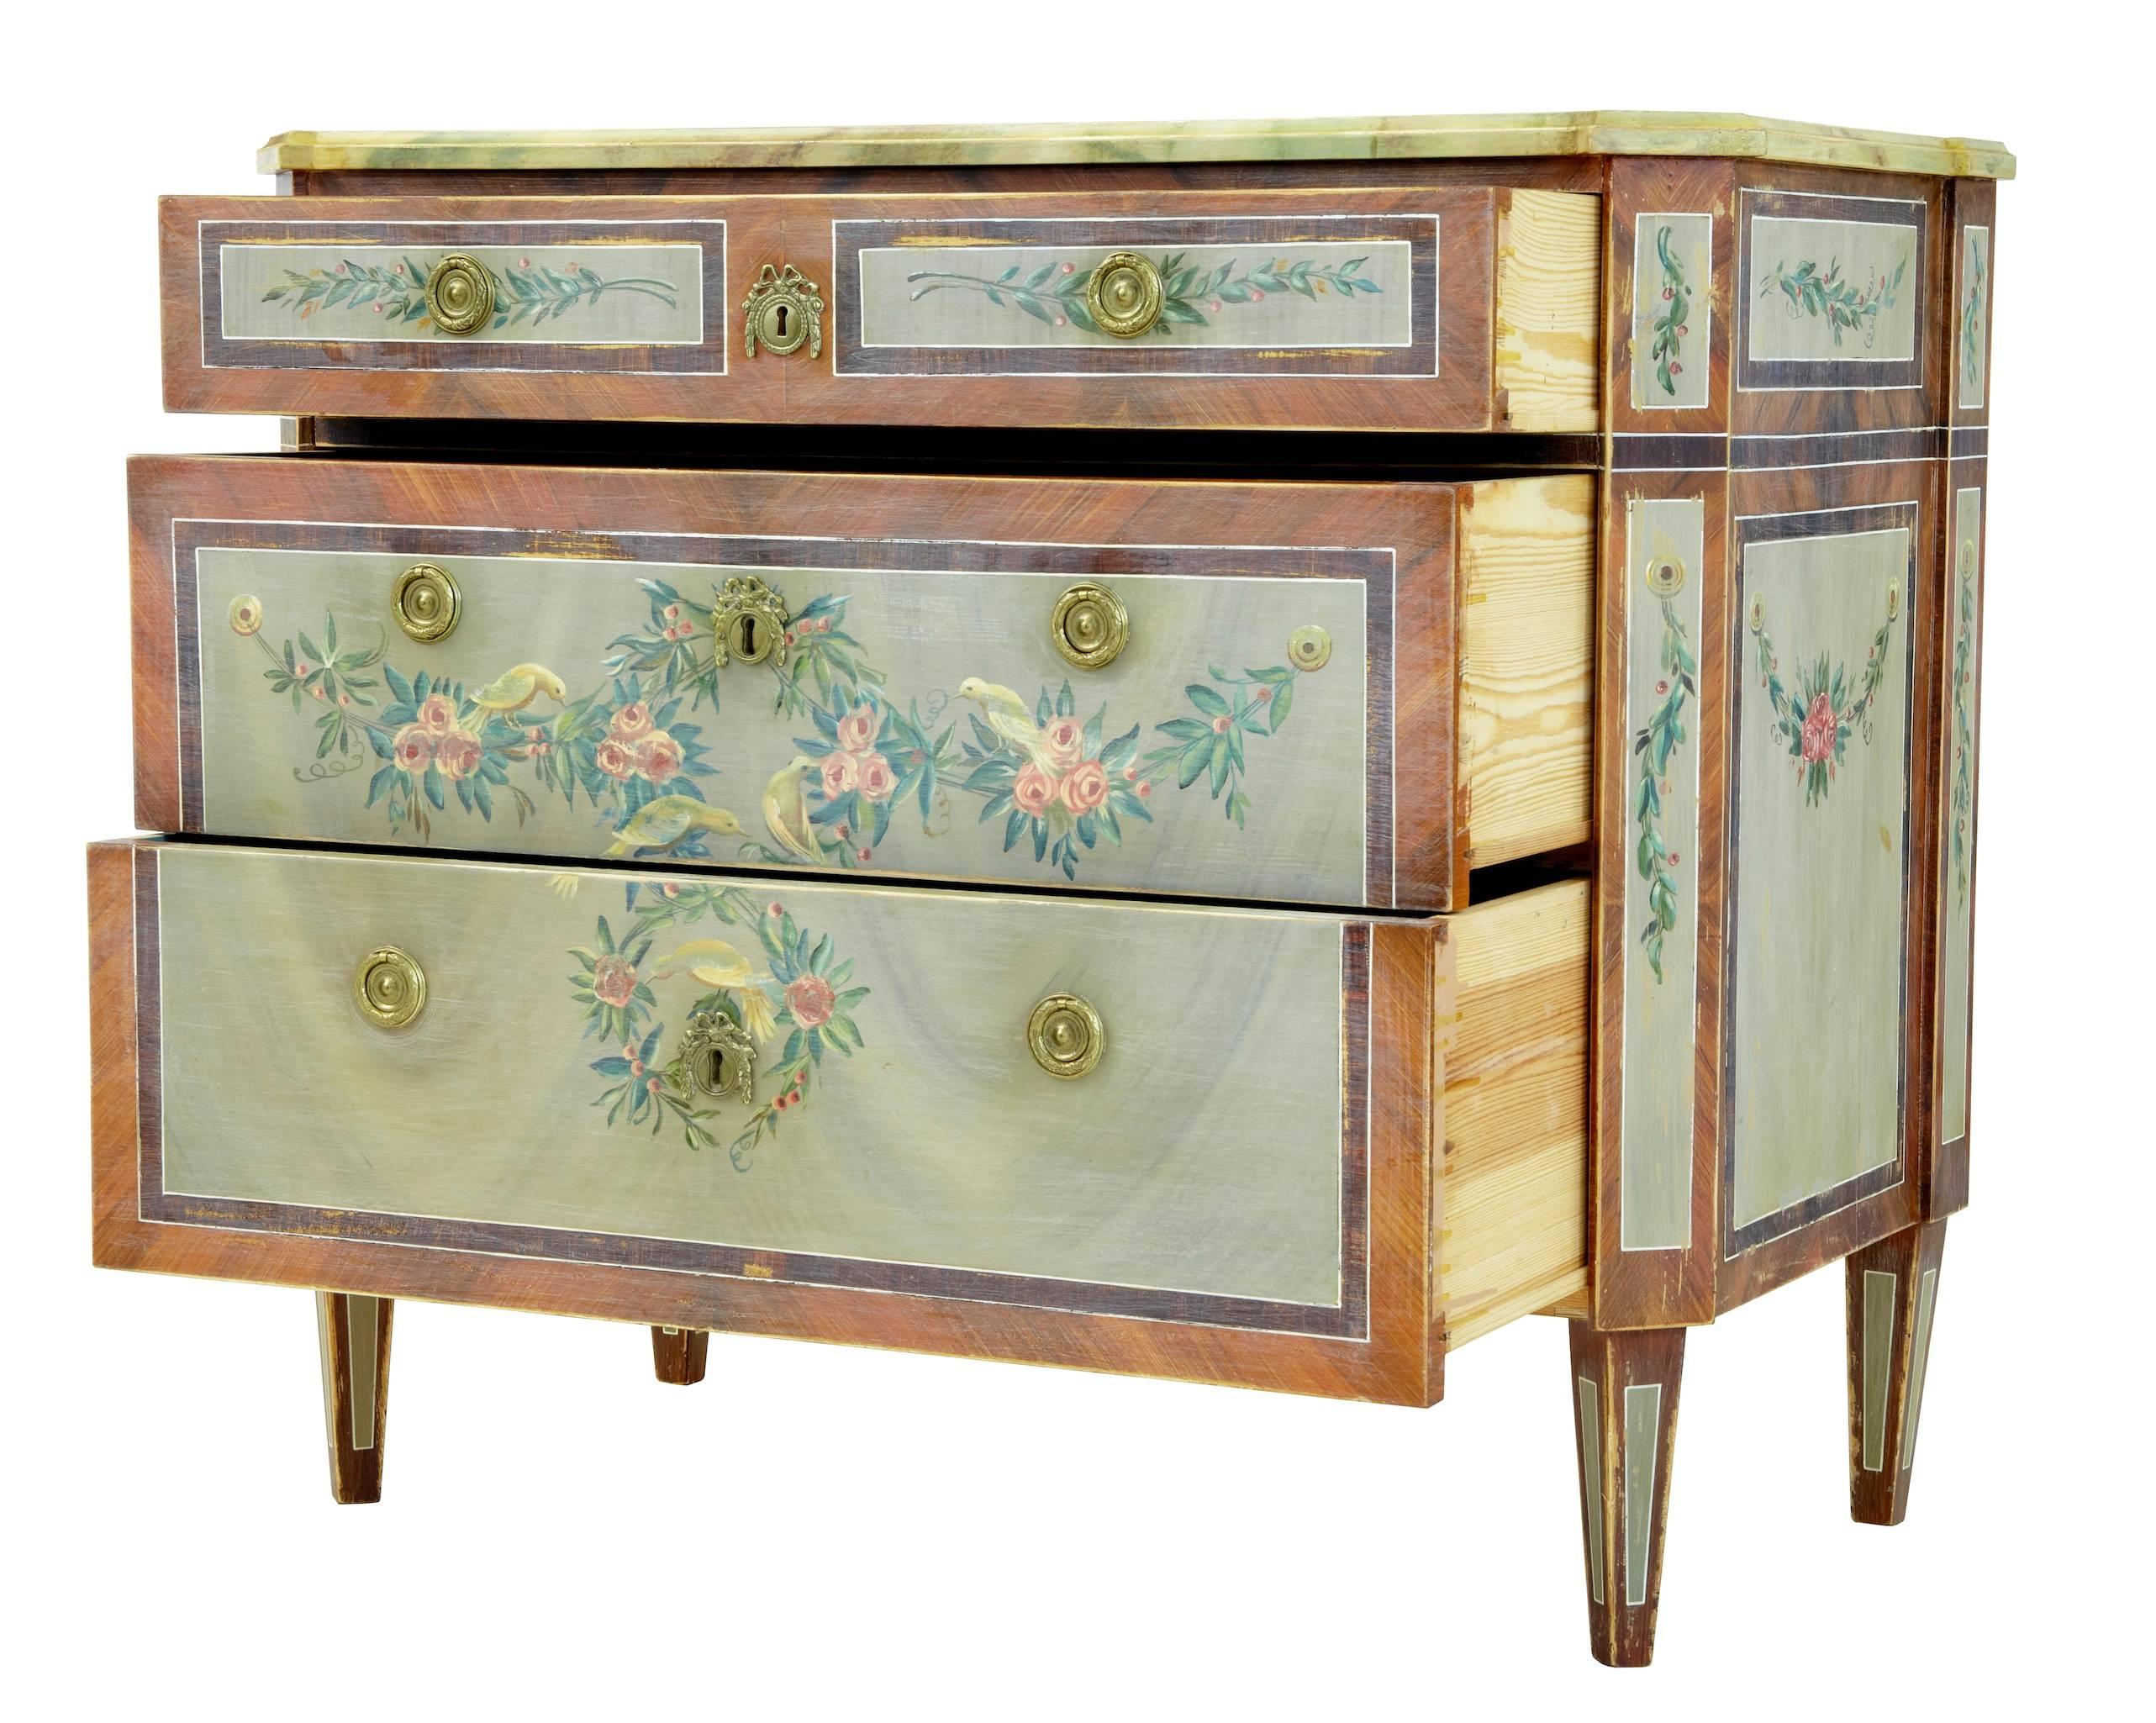 Stunning chest of drawers which is a 1960s reproduction of a period Gustavian commode, which has been painstakingly painted to match the original.
Artist's signature on the reverse malad av l ahlberg.
Faux marble top.
This chest really is a piece